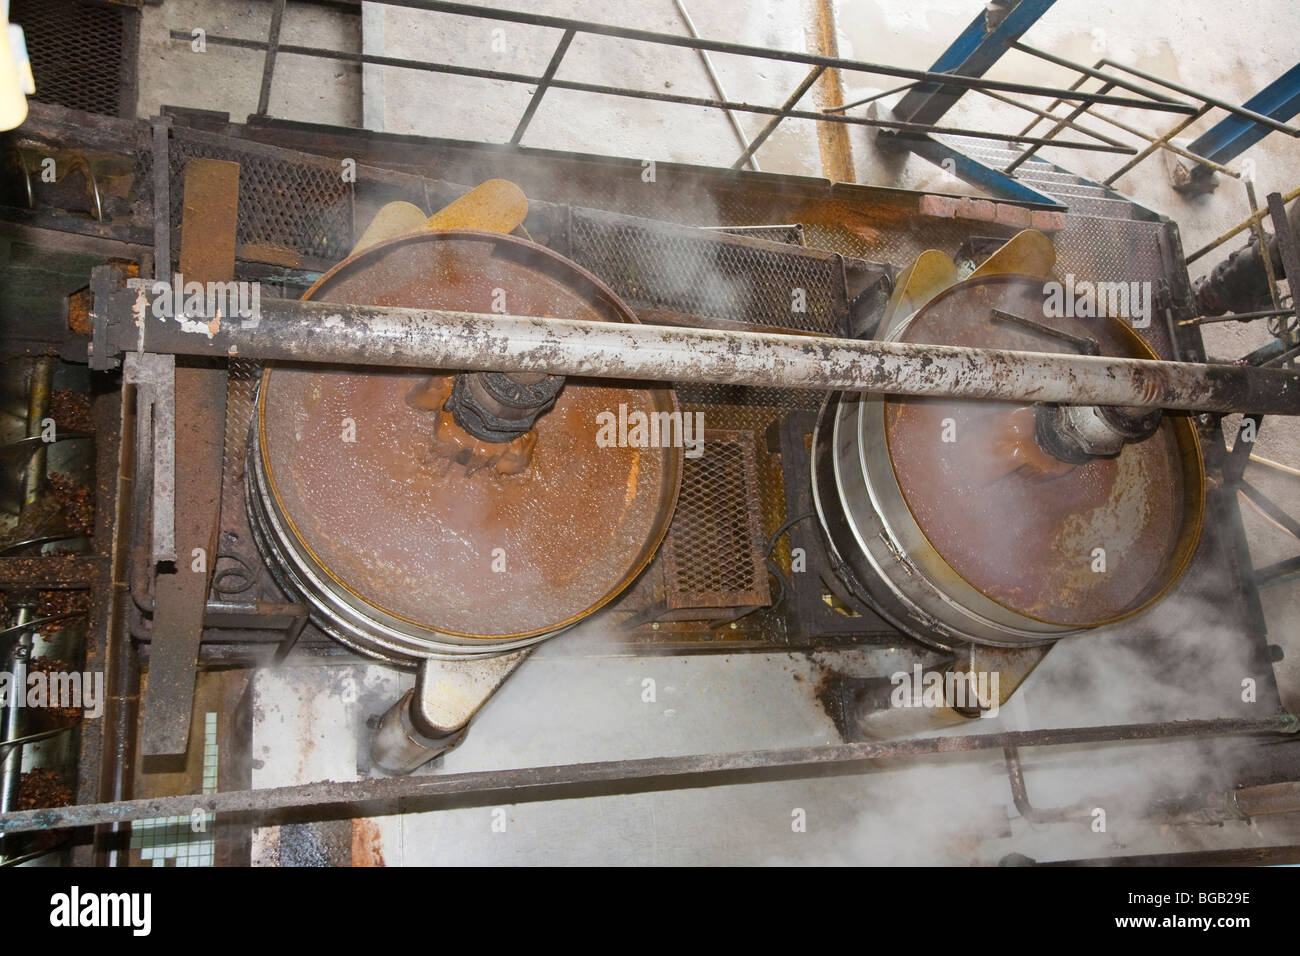 Looking down at steaming tubs of palm oil crude at the mill. The Sindora Palm Oil Mill, Johor Bahru, Malaysia Stock Photo